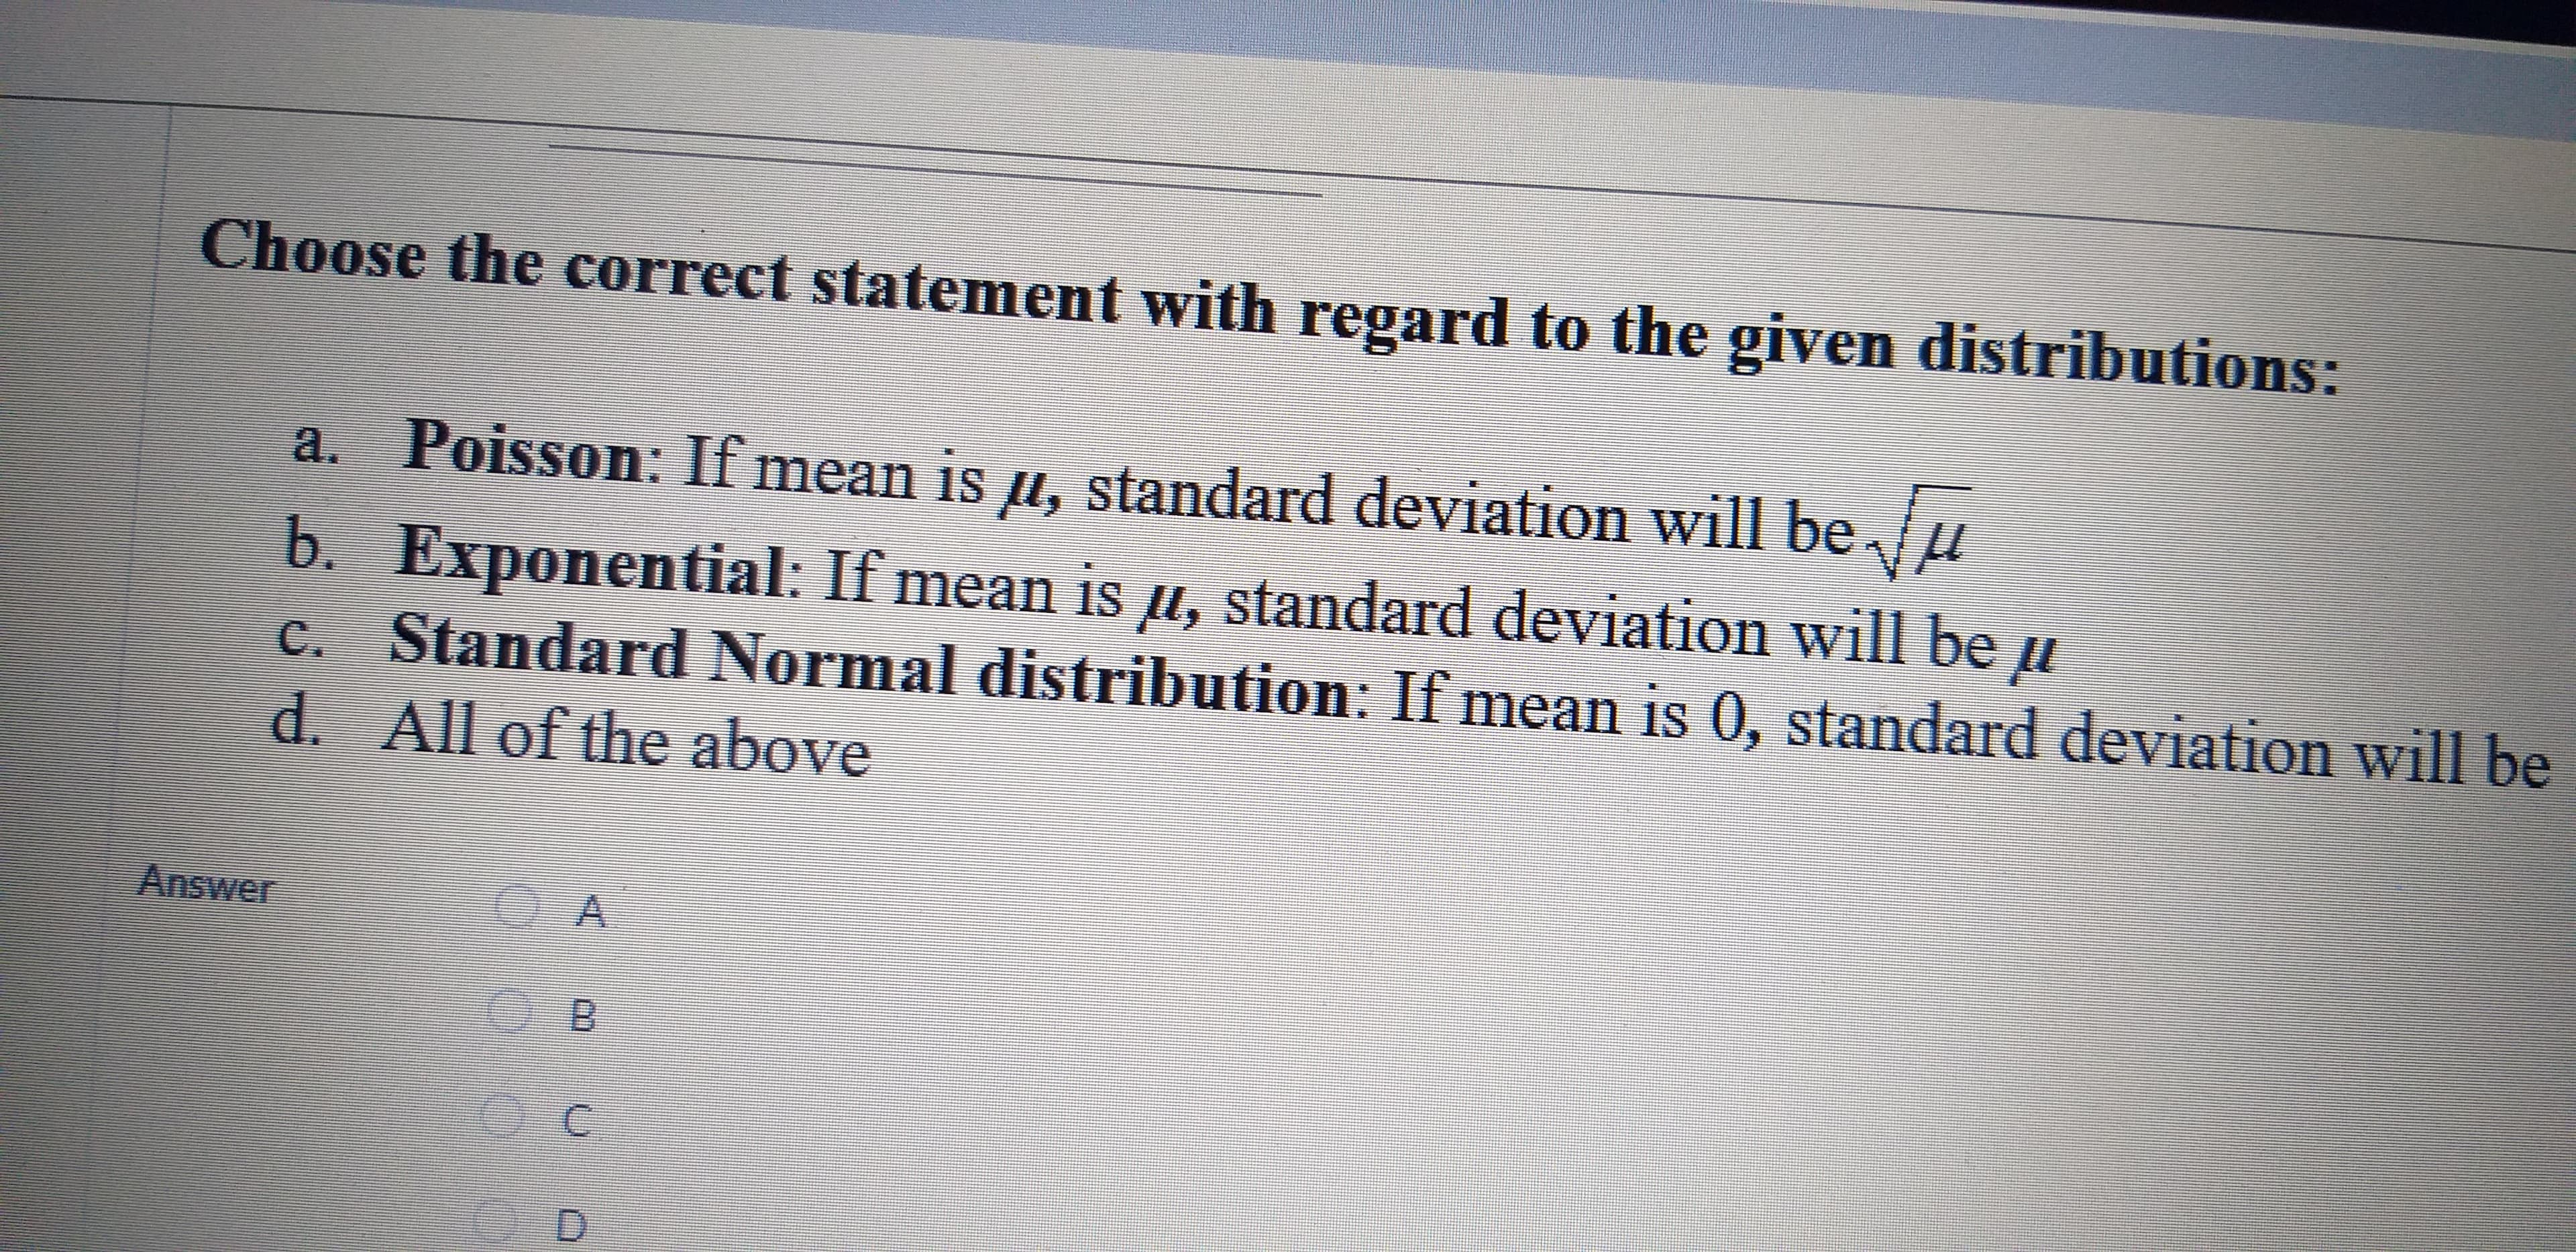 Choose the correct statement with regard to the given distributions:
a.
Poisson: If mean is u, standard deviation will beu
b. Exponential: If mean is u, standard deviation will be
c. Standard Normal distribution: If mean is 0, standard deviation will be
All of the above
Answer
A
B
C
D
